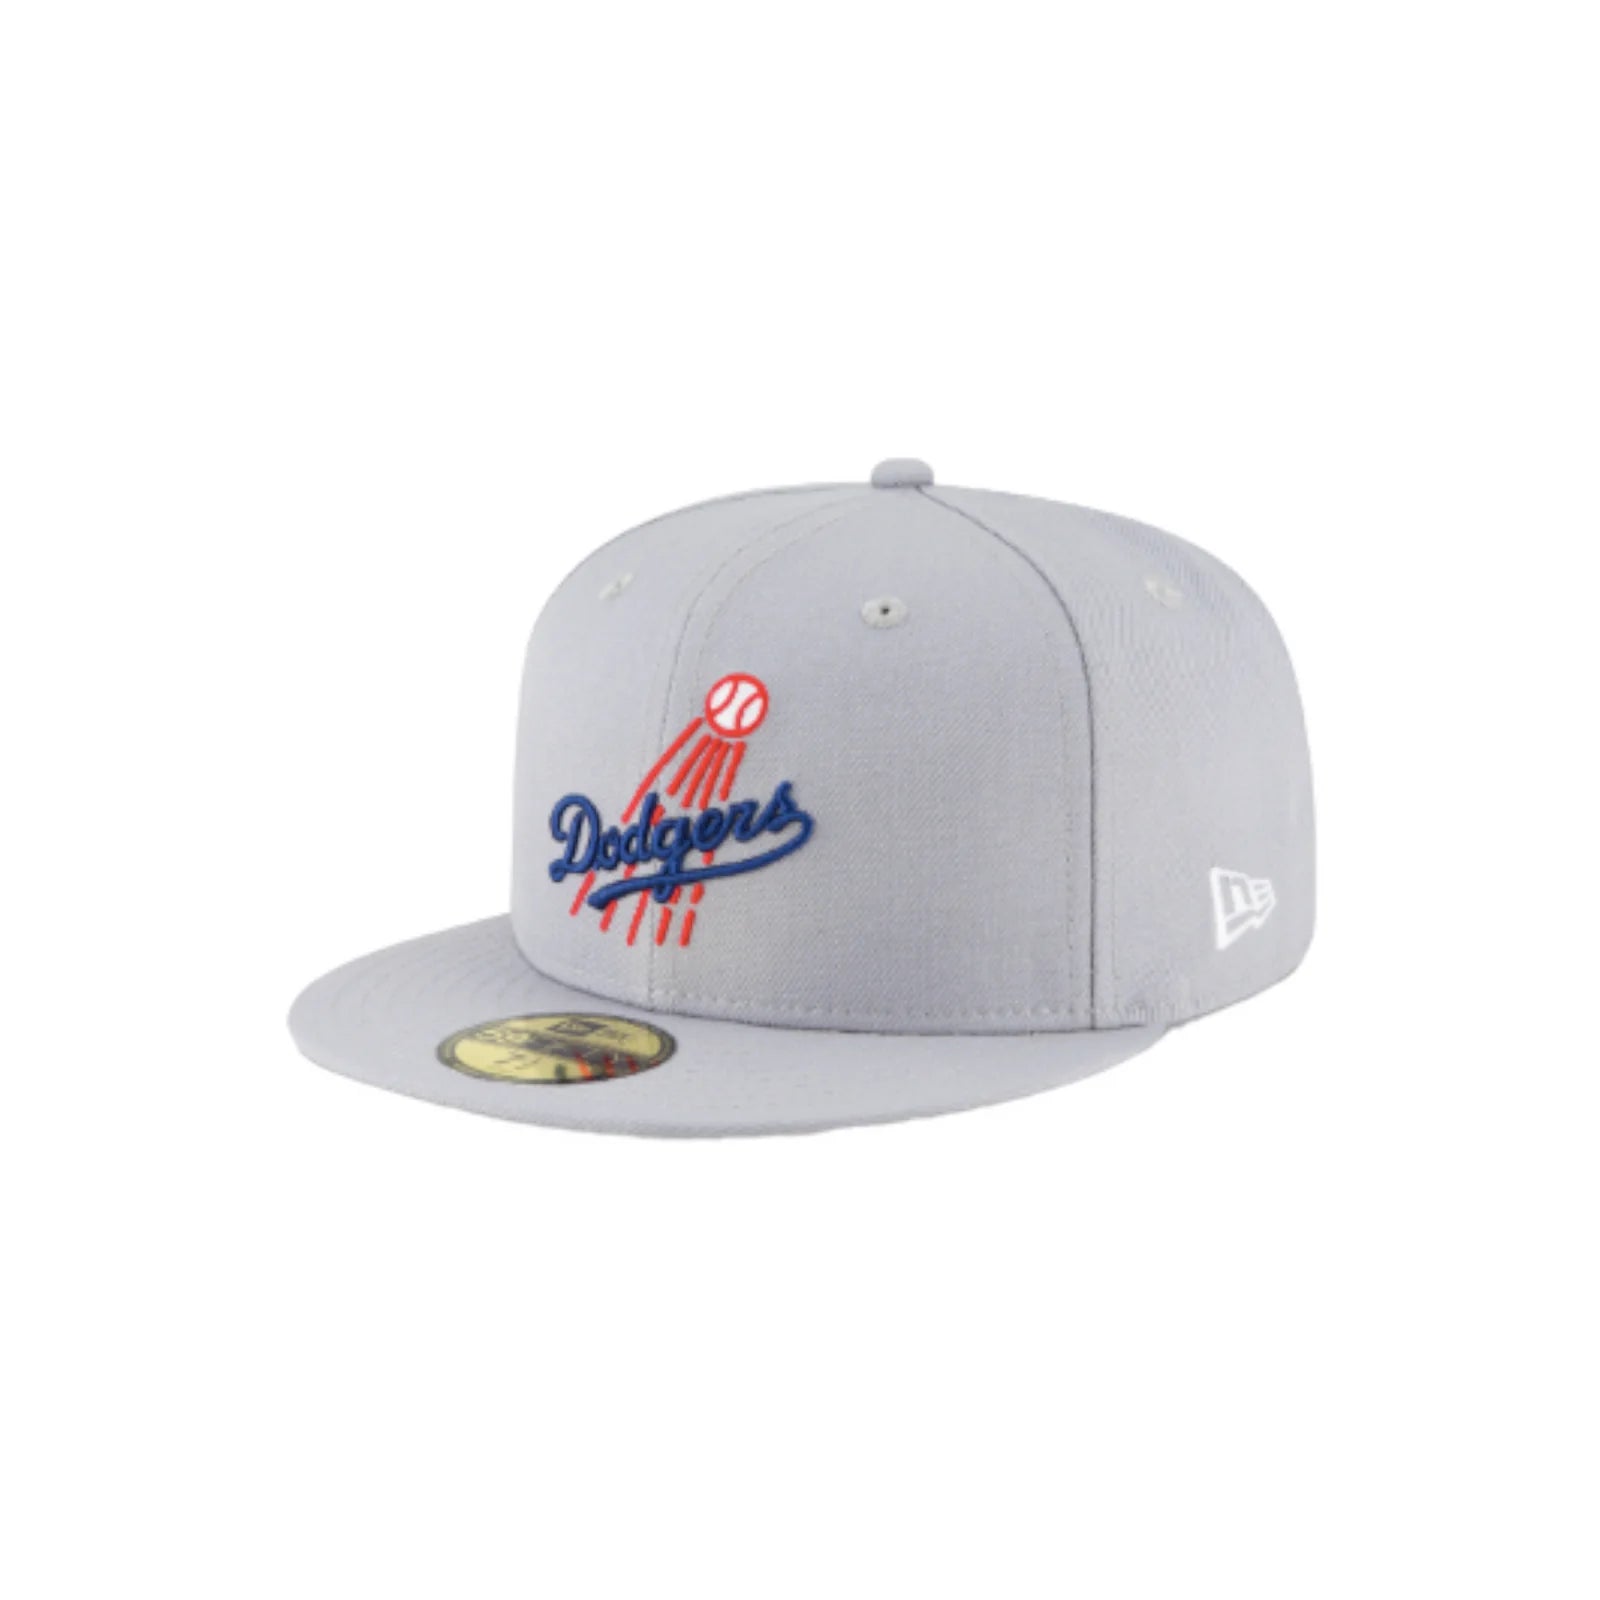 Gorra New Era MLB Cooperstown Dodgers MLB 59fifty